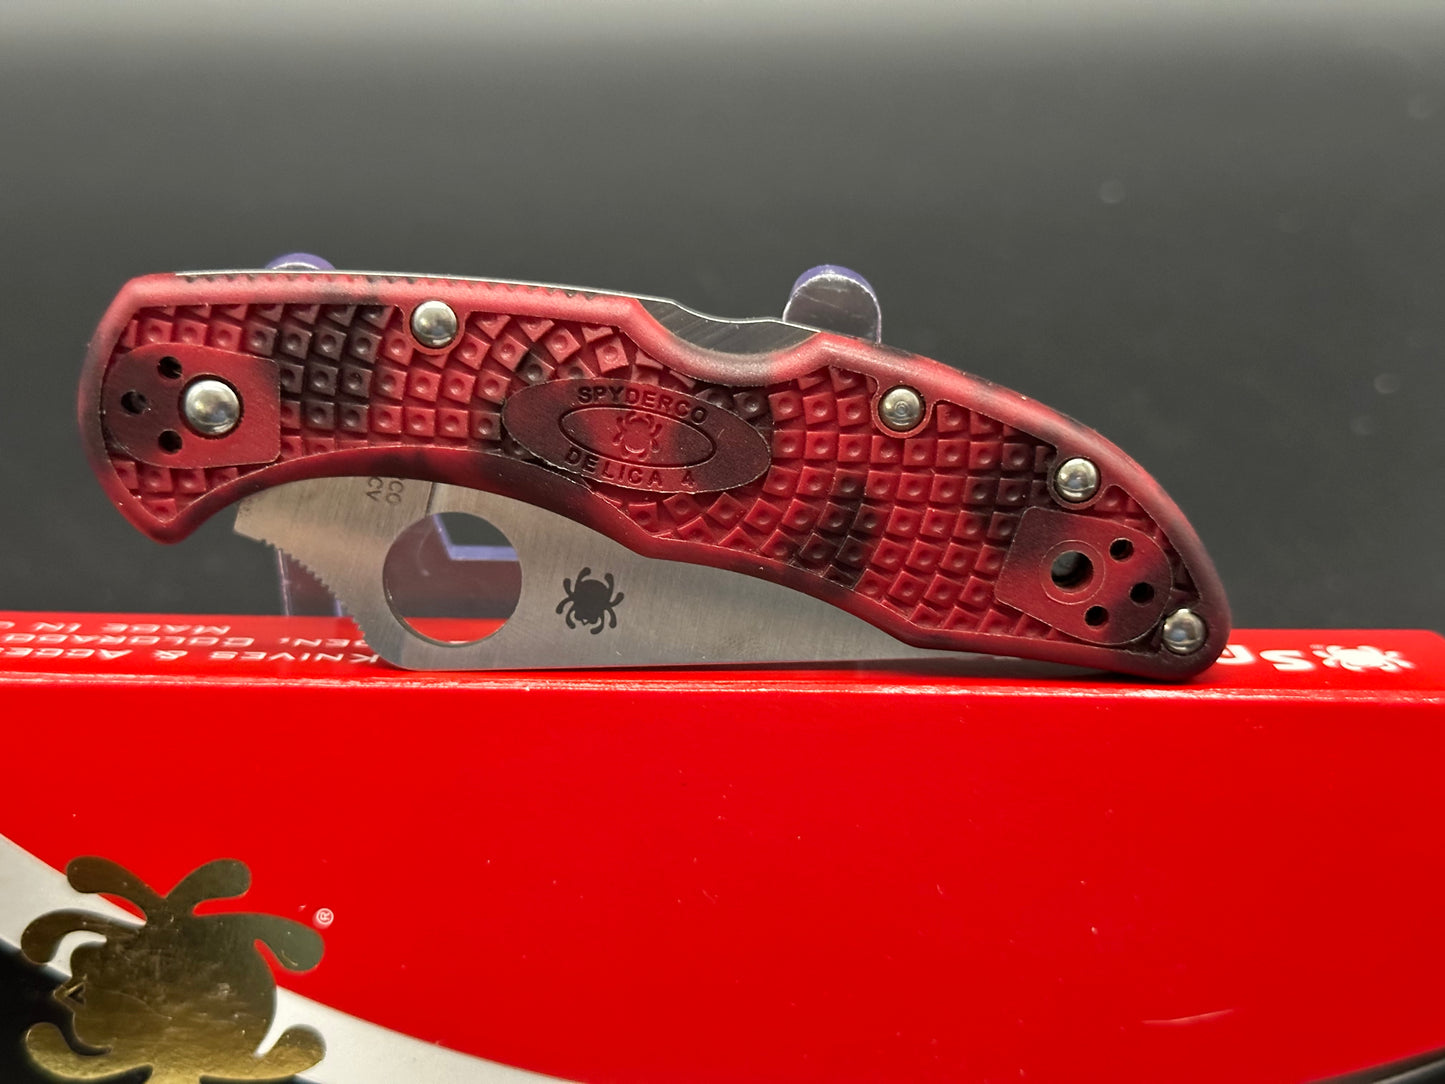 Spyderco Delica 4 FRN Red/Black Zome (DLT Trading Exclusive)